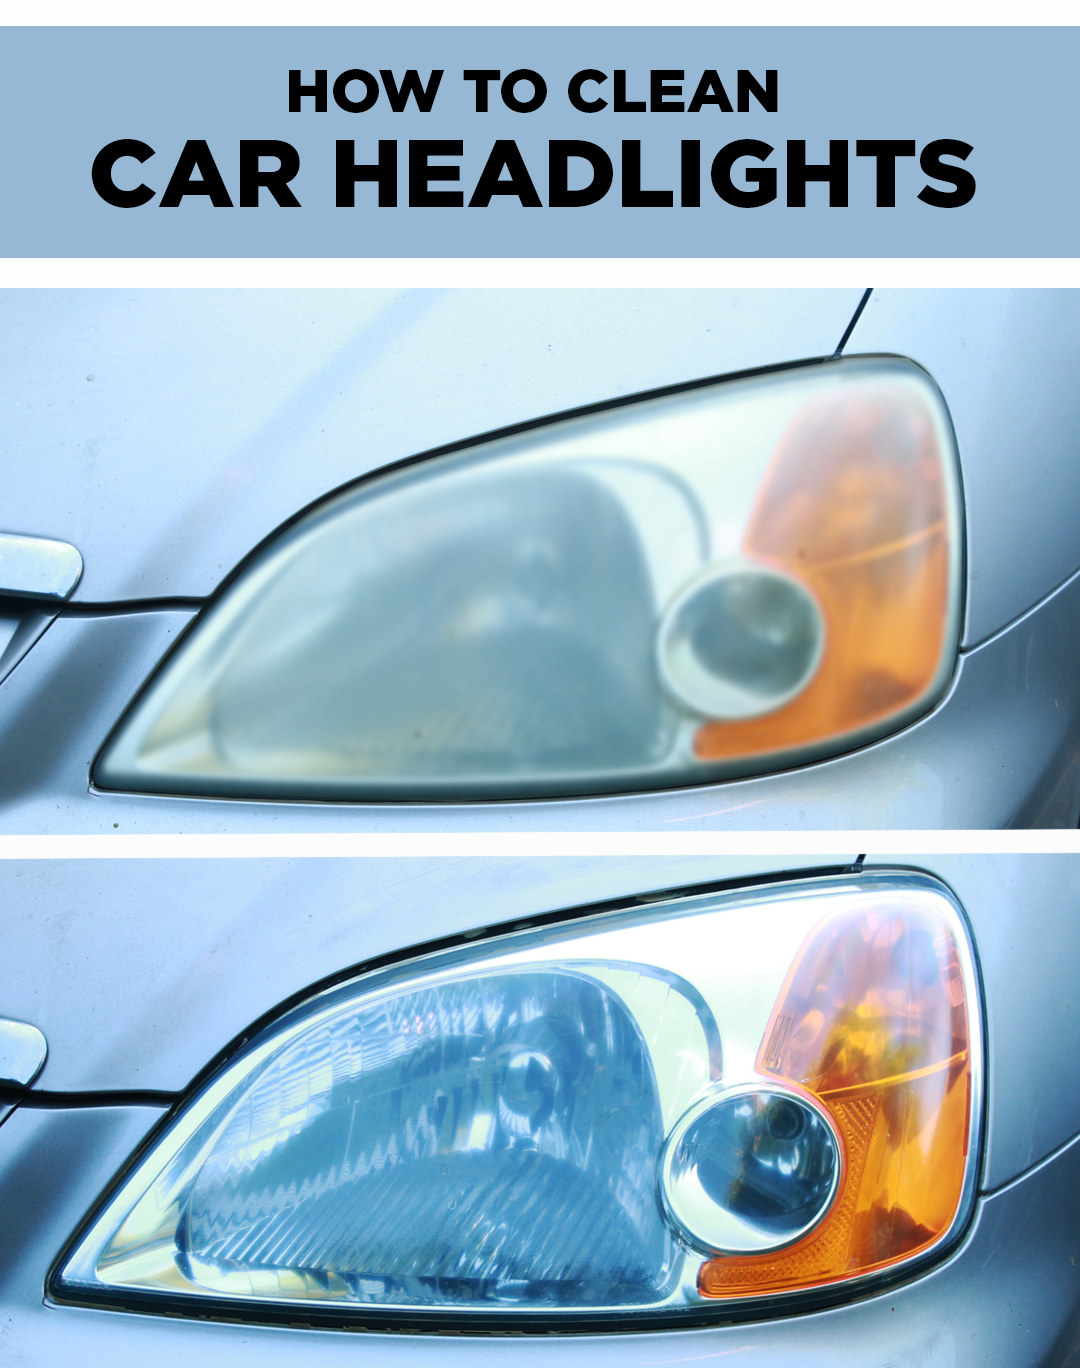 Dirty Car Headlights Are No Match For This Clever Cleaning